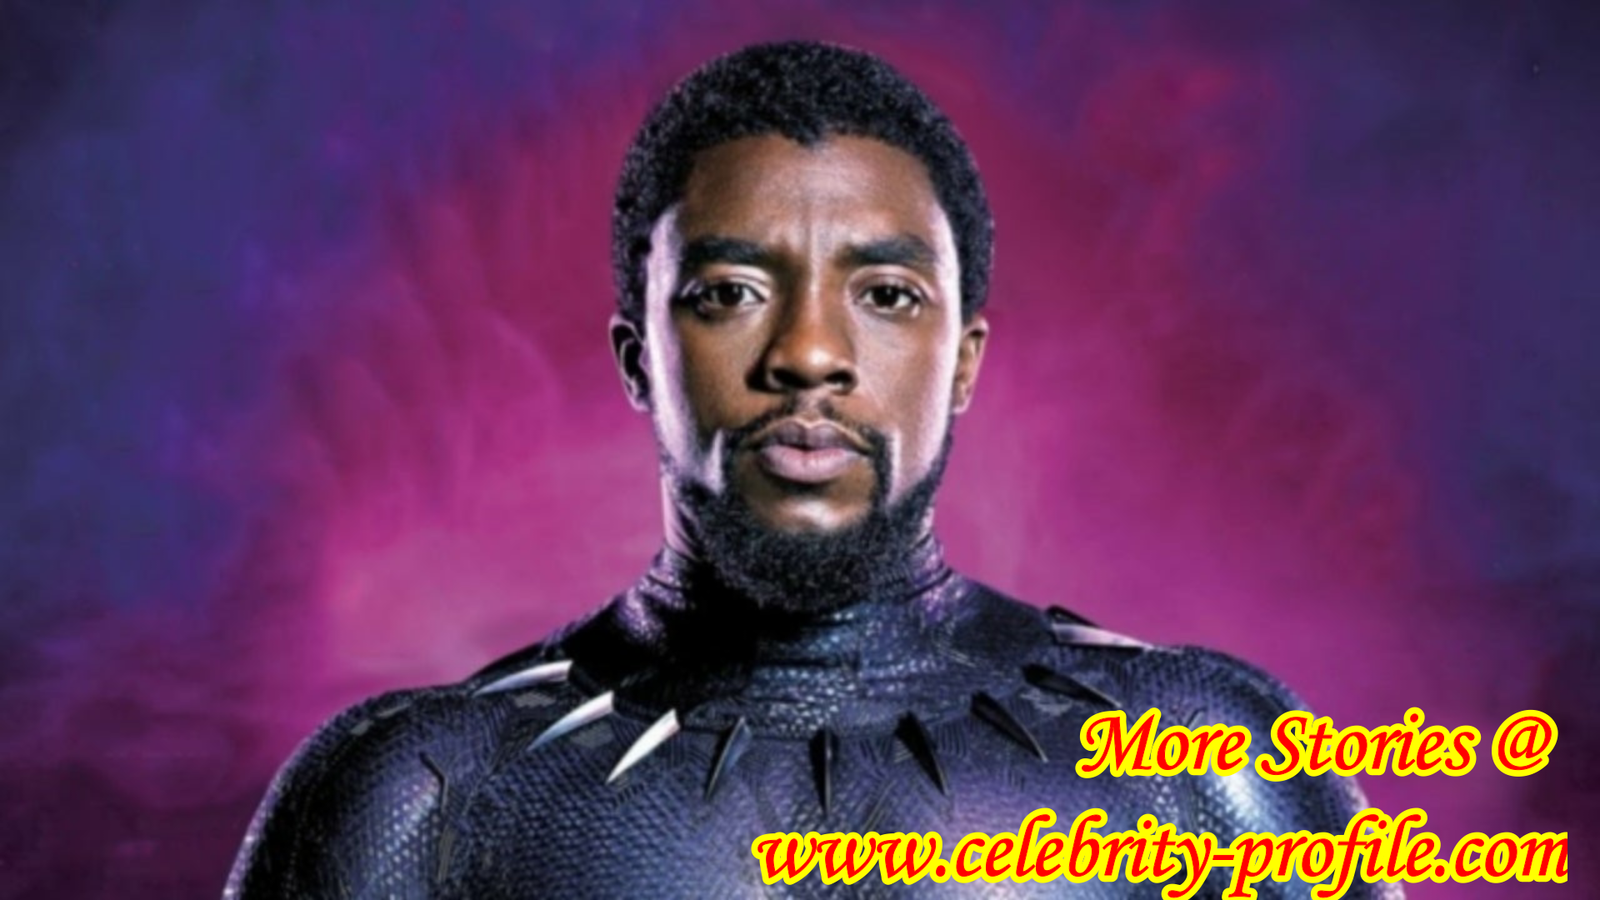 What Actuially killed Black Panther' star Chadwick Boseman at 43